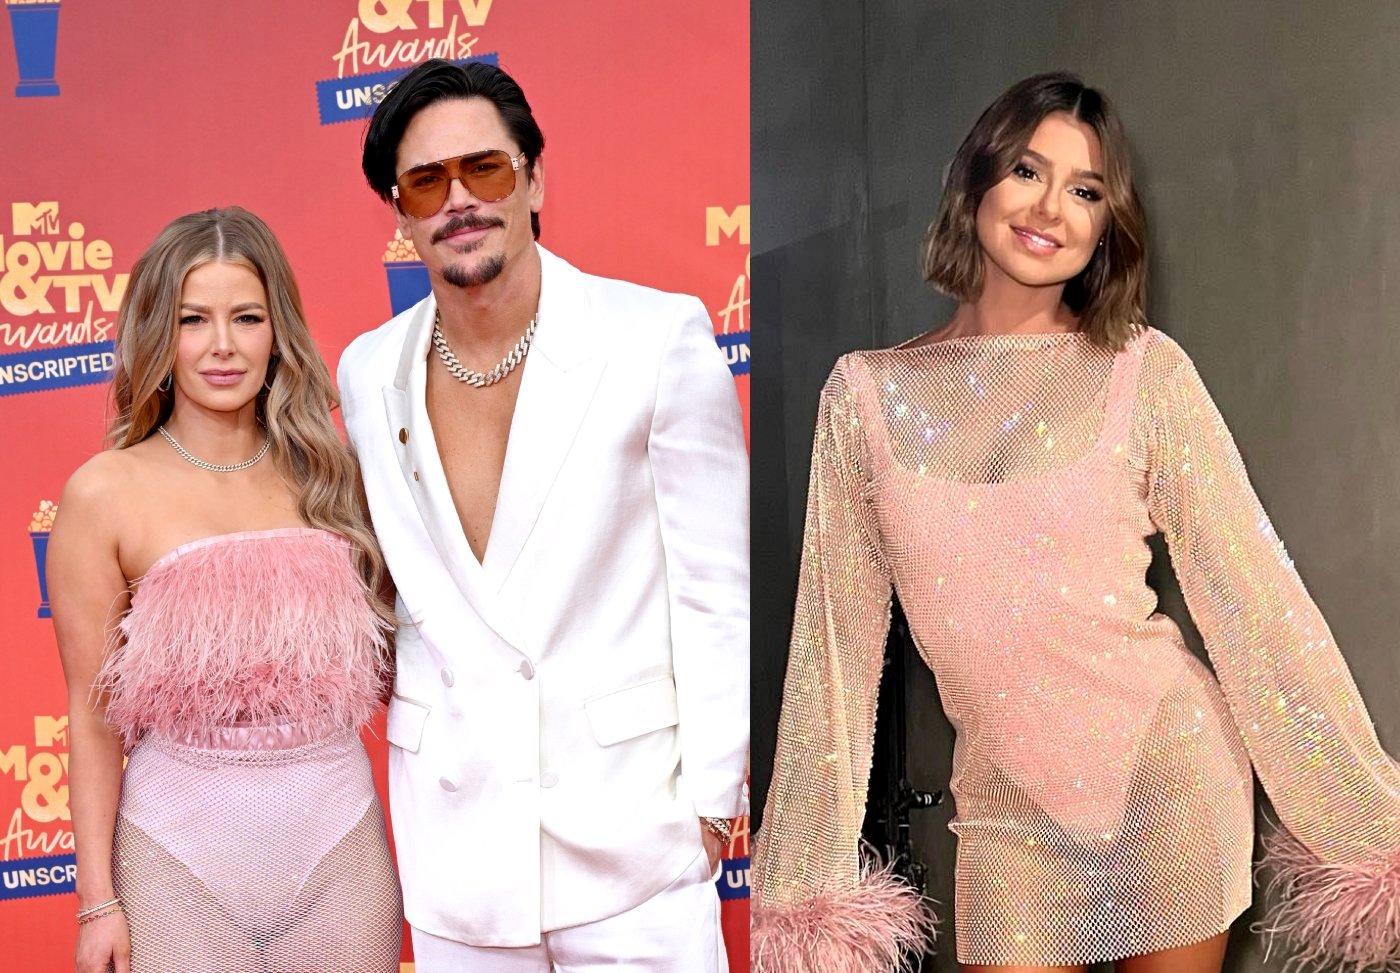 VIDEO: Tom Sandoval Comes Clean to Ariana, Admits to More Cheating in Vanderpump Rules Finale, Plus Ariana Screams, Raquel Reacts as Affair is Exposed, and Kristen Returns